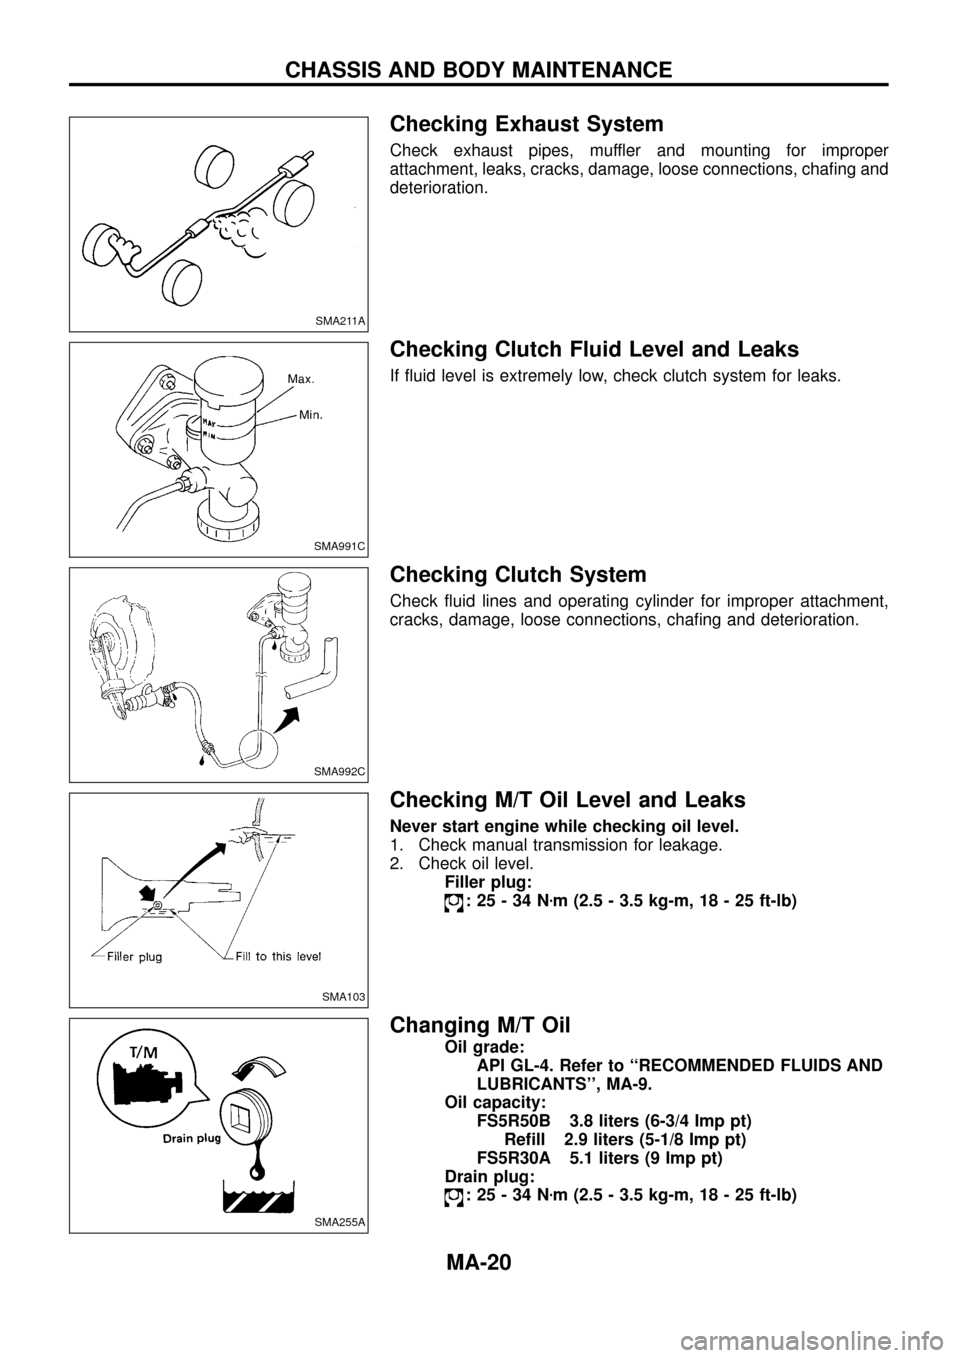 NISSAN PATROL 1998 Y61 / 5.G Maintenance User Guide Checking Exhaust System
Check exhaust pipes, muffler and mounting for improper
attachment, leaks, cracks, damage, loose connections, cha®ng and
deterioration.
Checking Clutch Fluid Level and Leaks
If